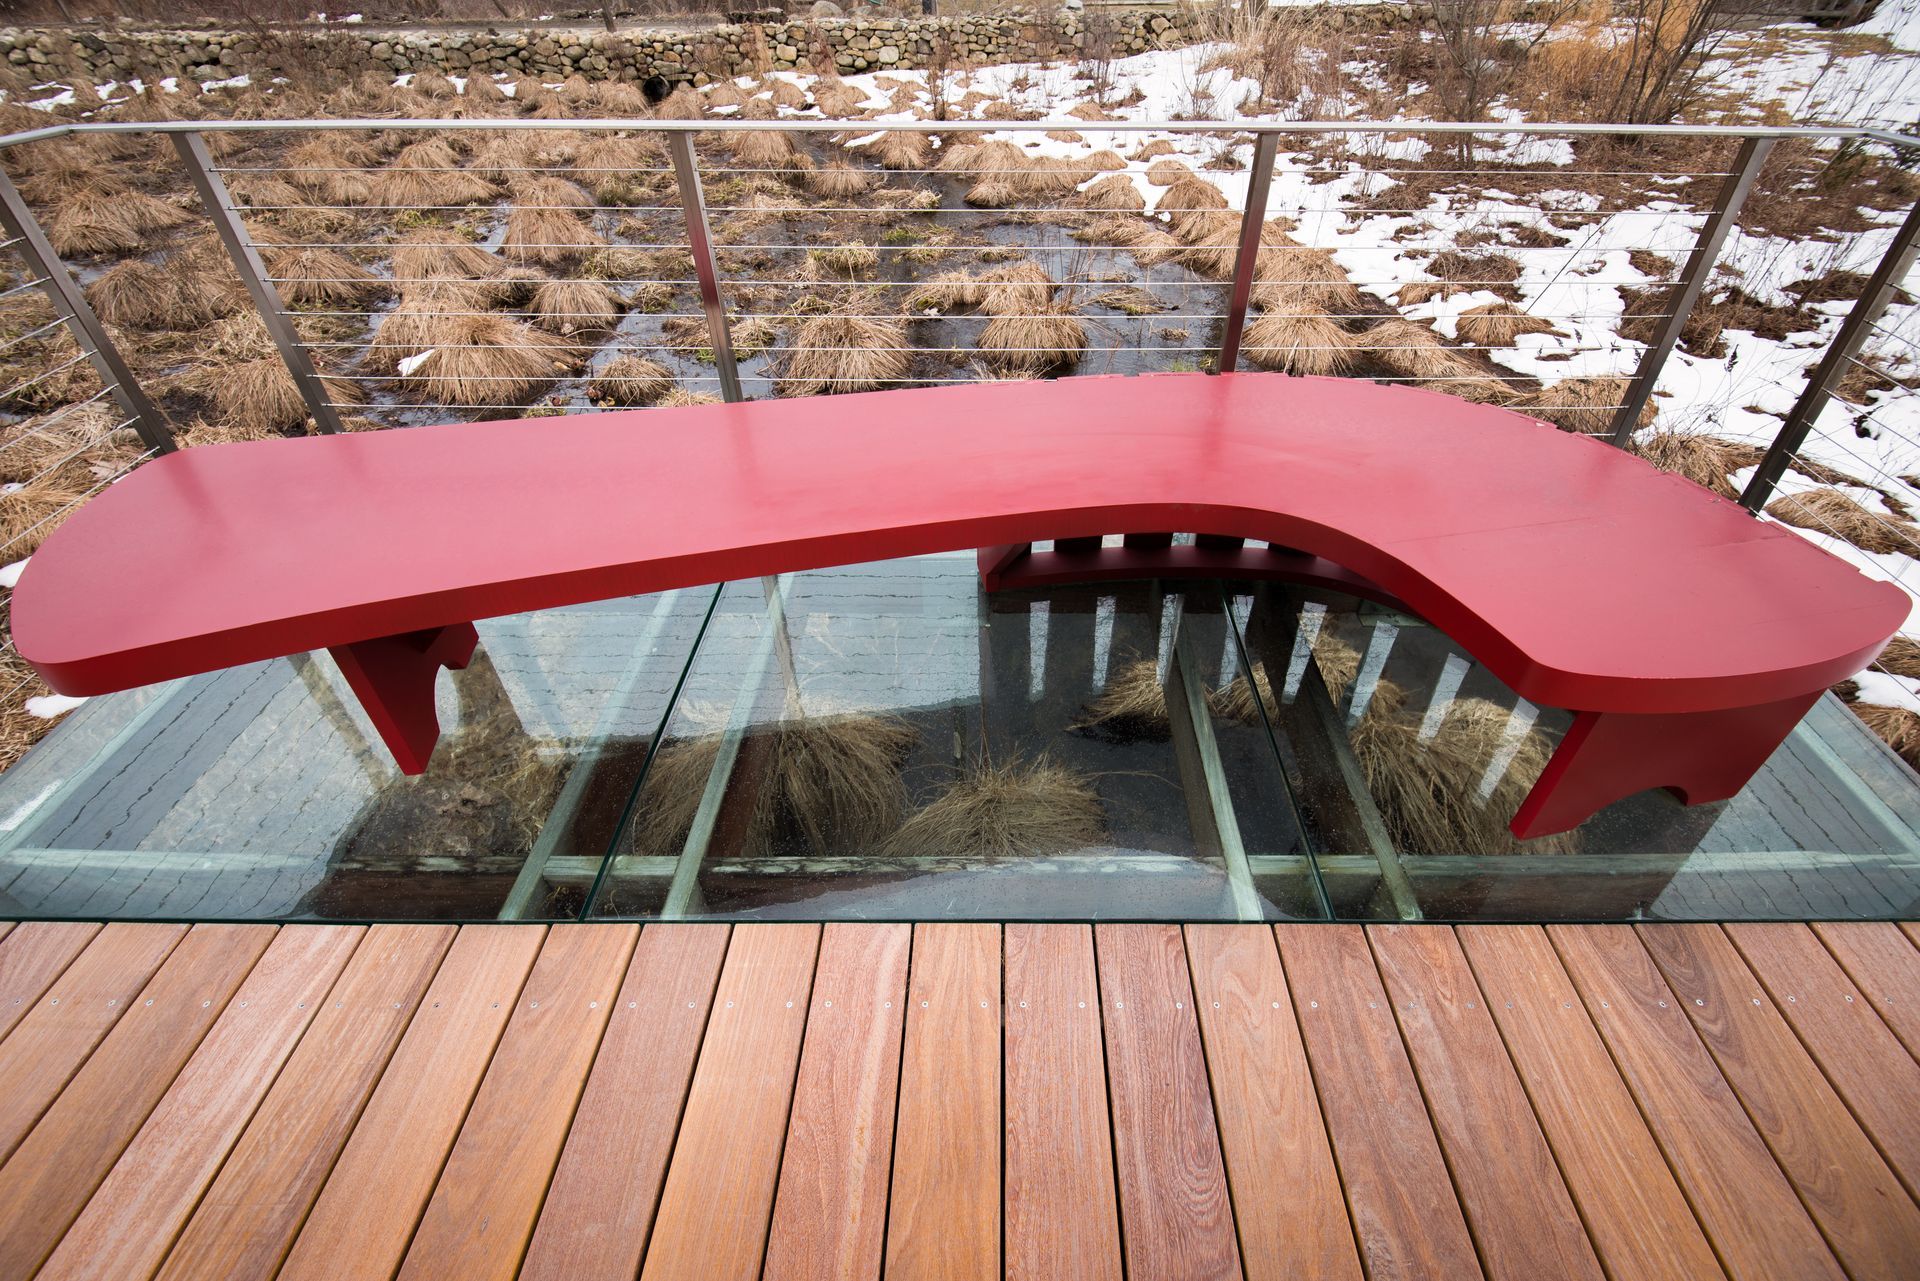 Walkable glass flooring on a deck